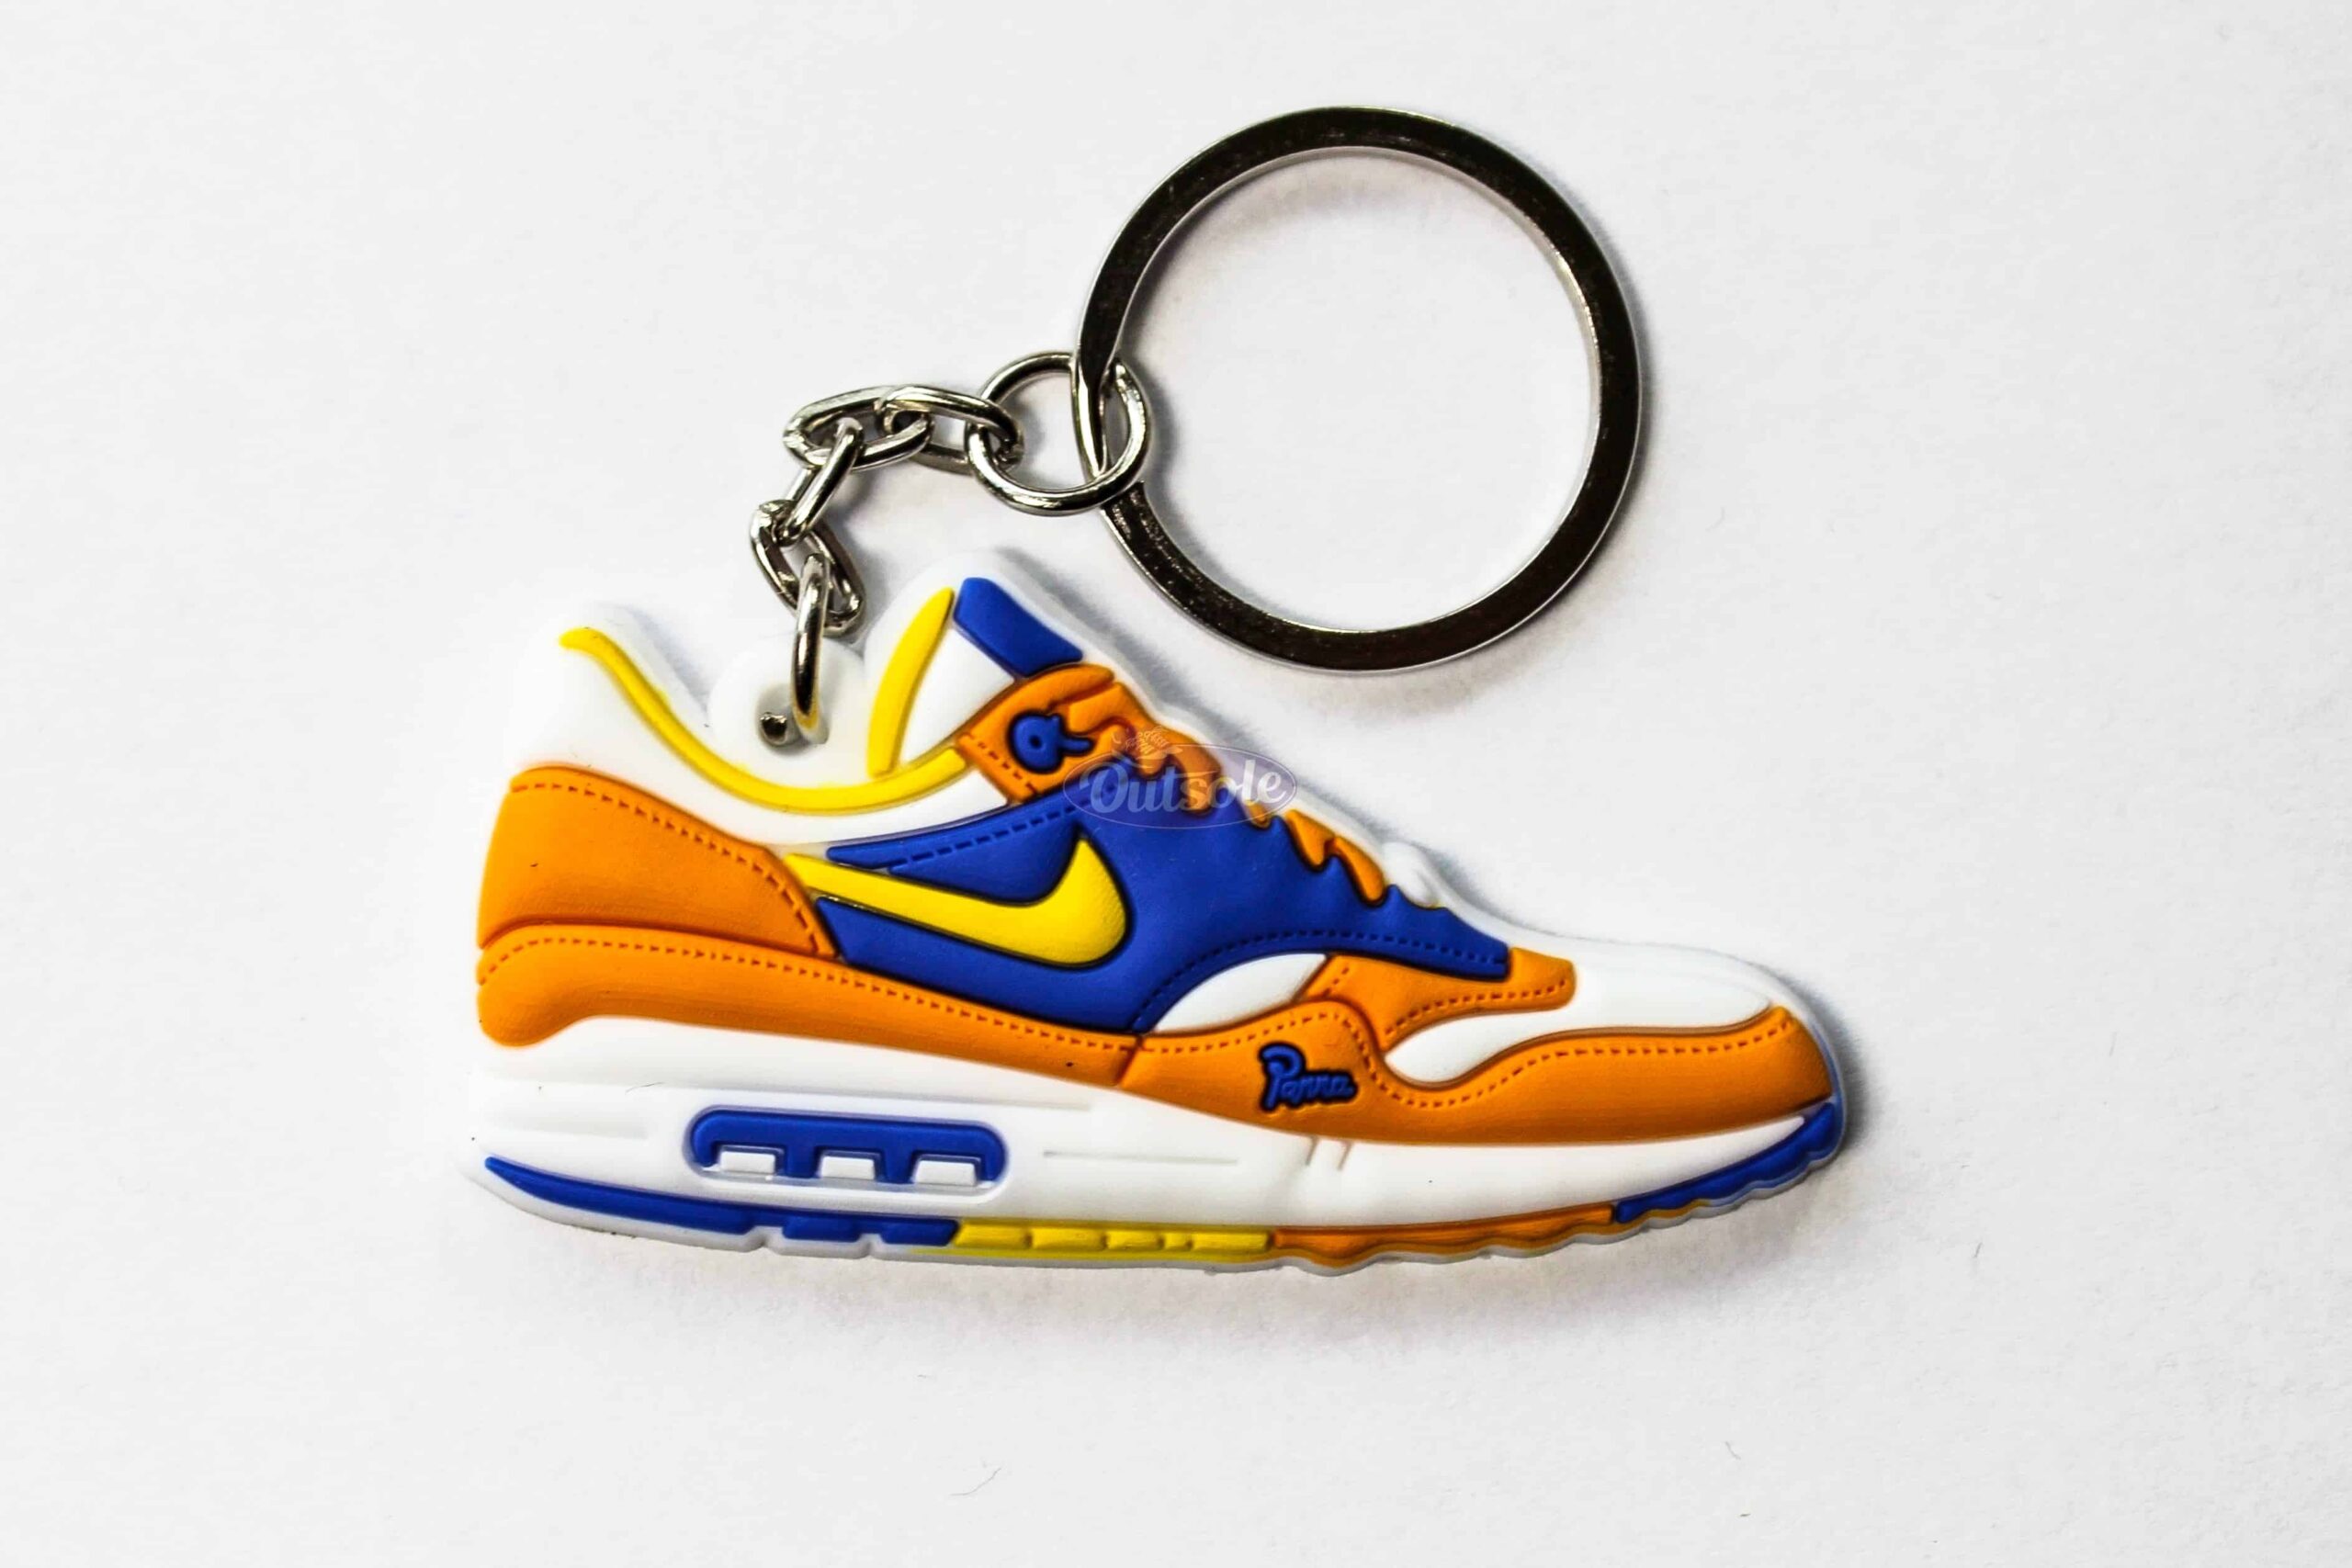 Nike Air Max 1 Albert Heijn keychain | ✅ Online at Outsole